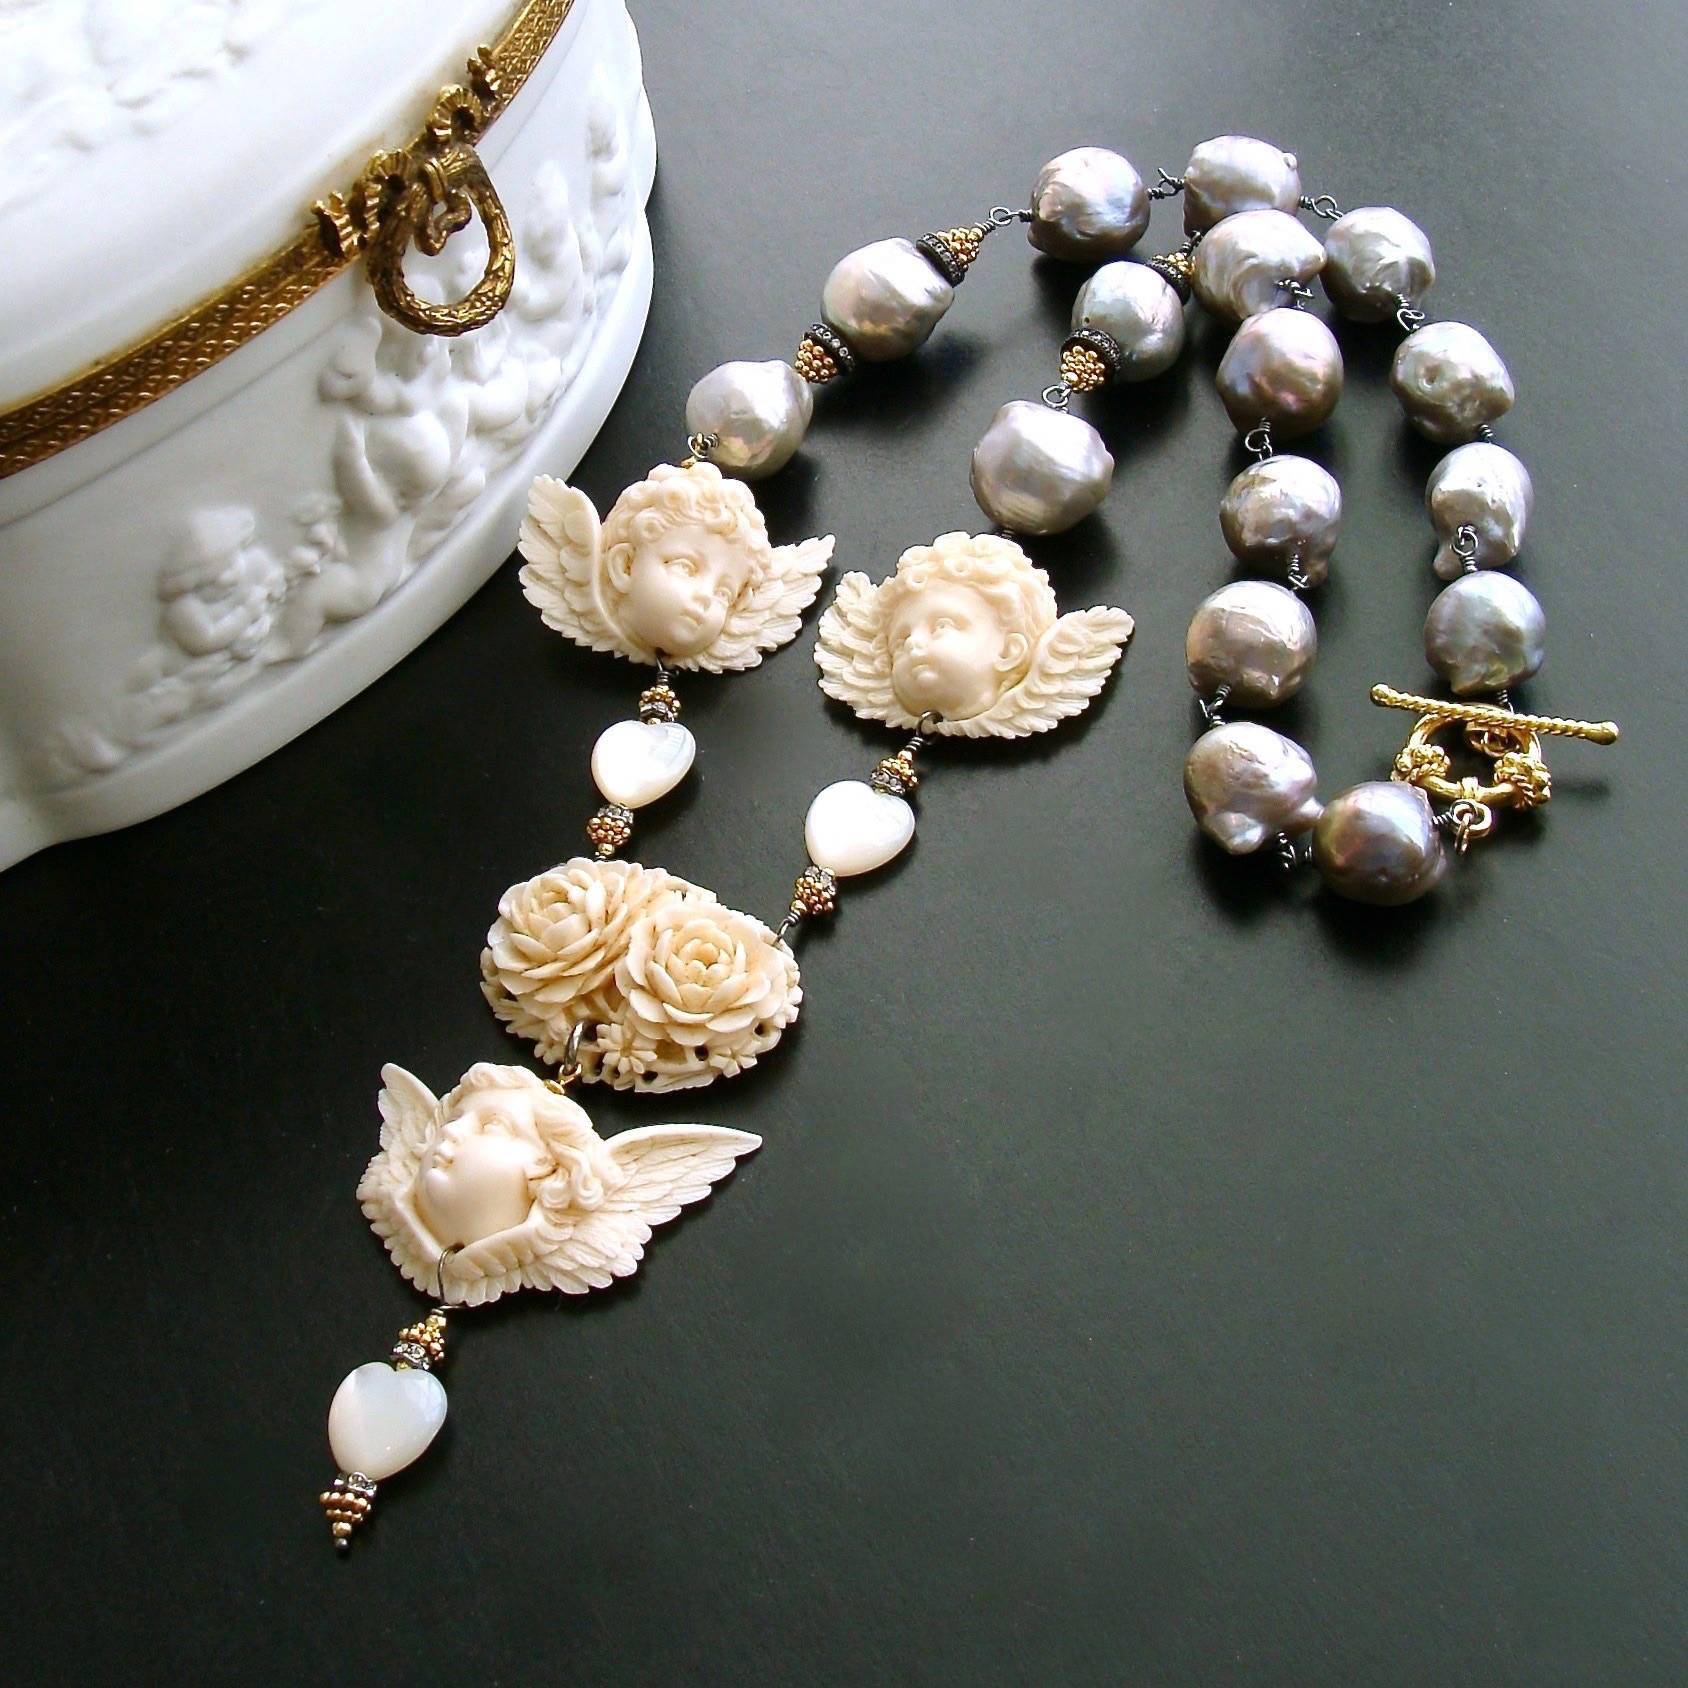 A silky smooth strand of large gray baroque pearls - is the dreamy basis of this heavenly necklace design.  These naturally colored craggy baroque pearls are hand linked in rhodium silver and feature mixed metals and crystal accents.  These generous